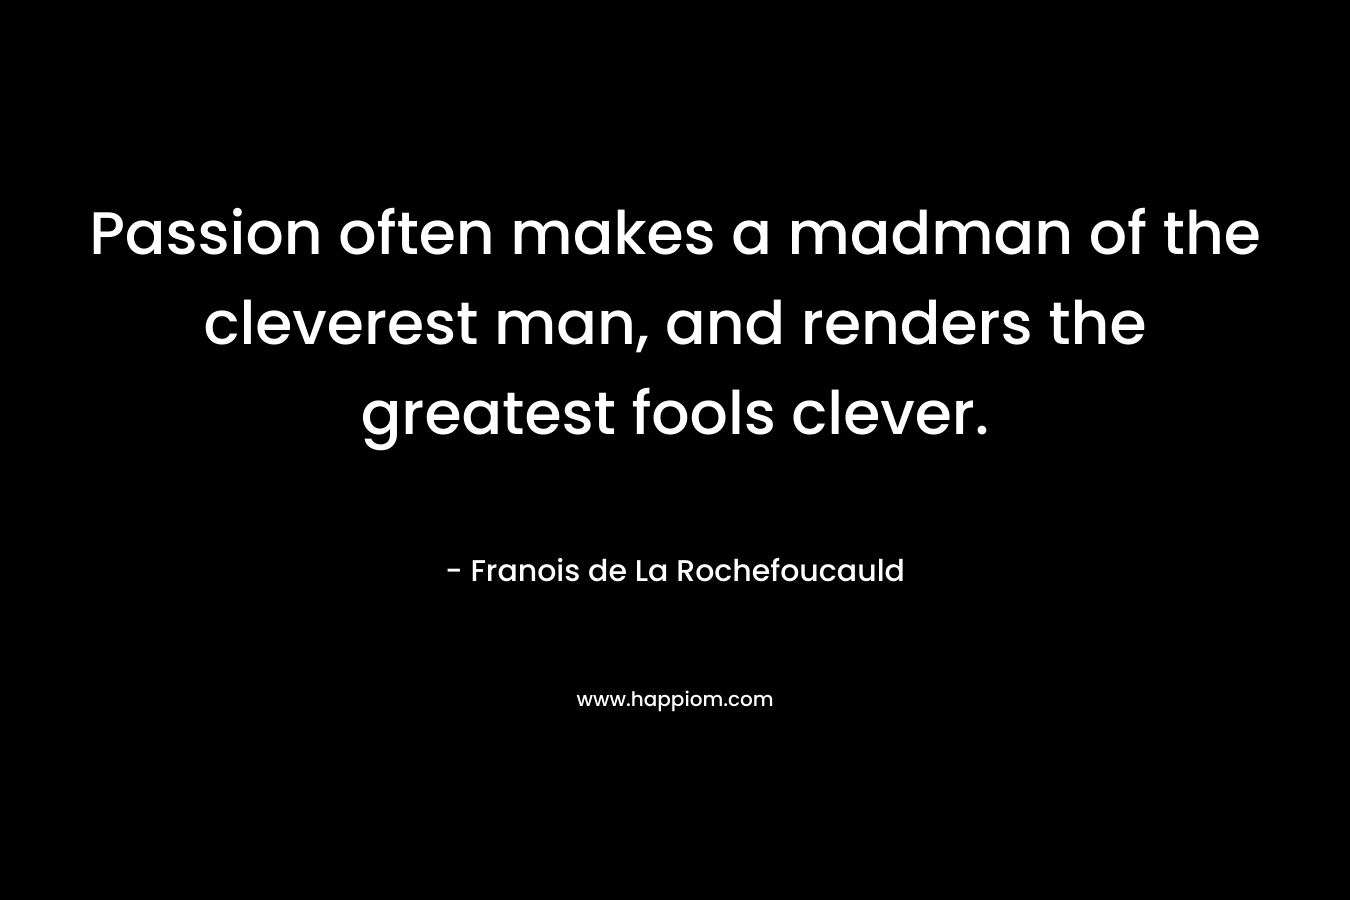 Passion often makes a madman of the cleverest man, and renders the greatest fools clever. – Franois de La Rochefoucauld